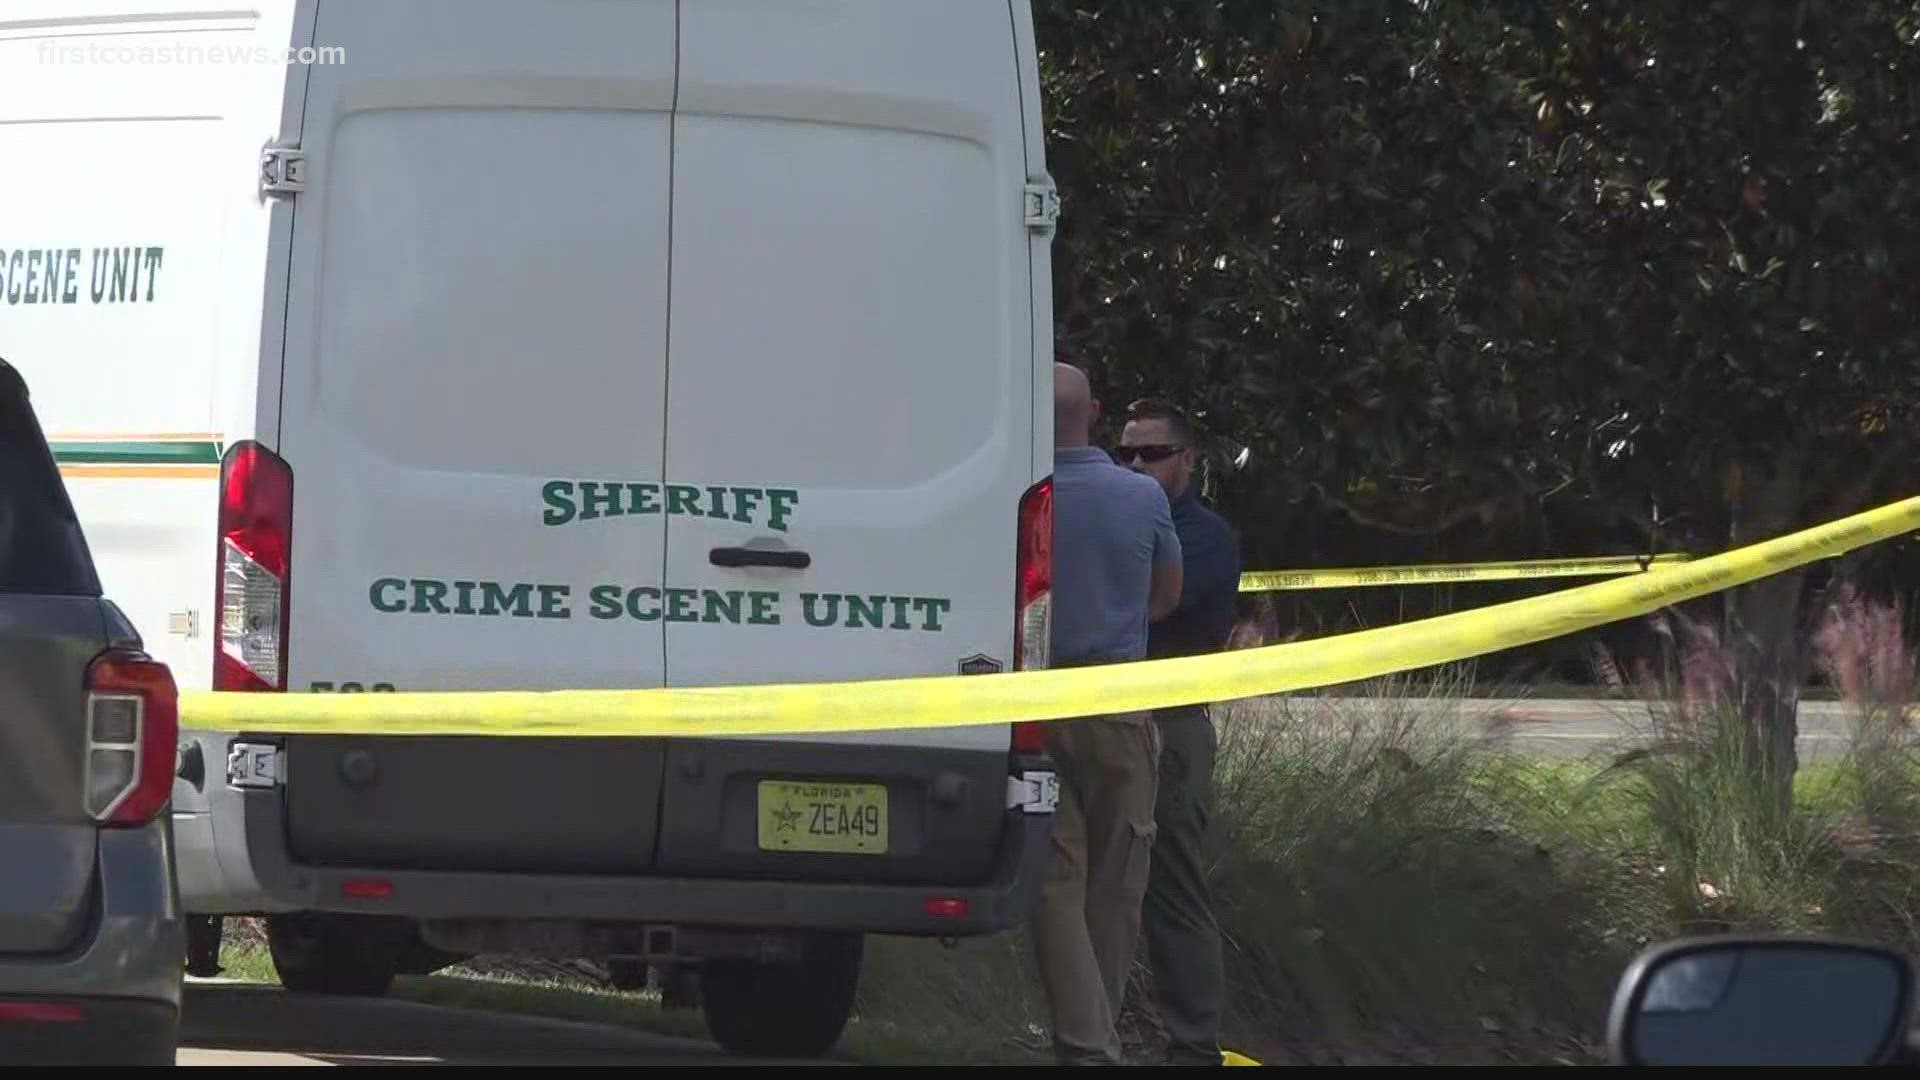 The St. Johns County Sheriff's Office is investigating after a body was found in the area of Julington Creek Plantation Friday afternoon.